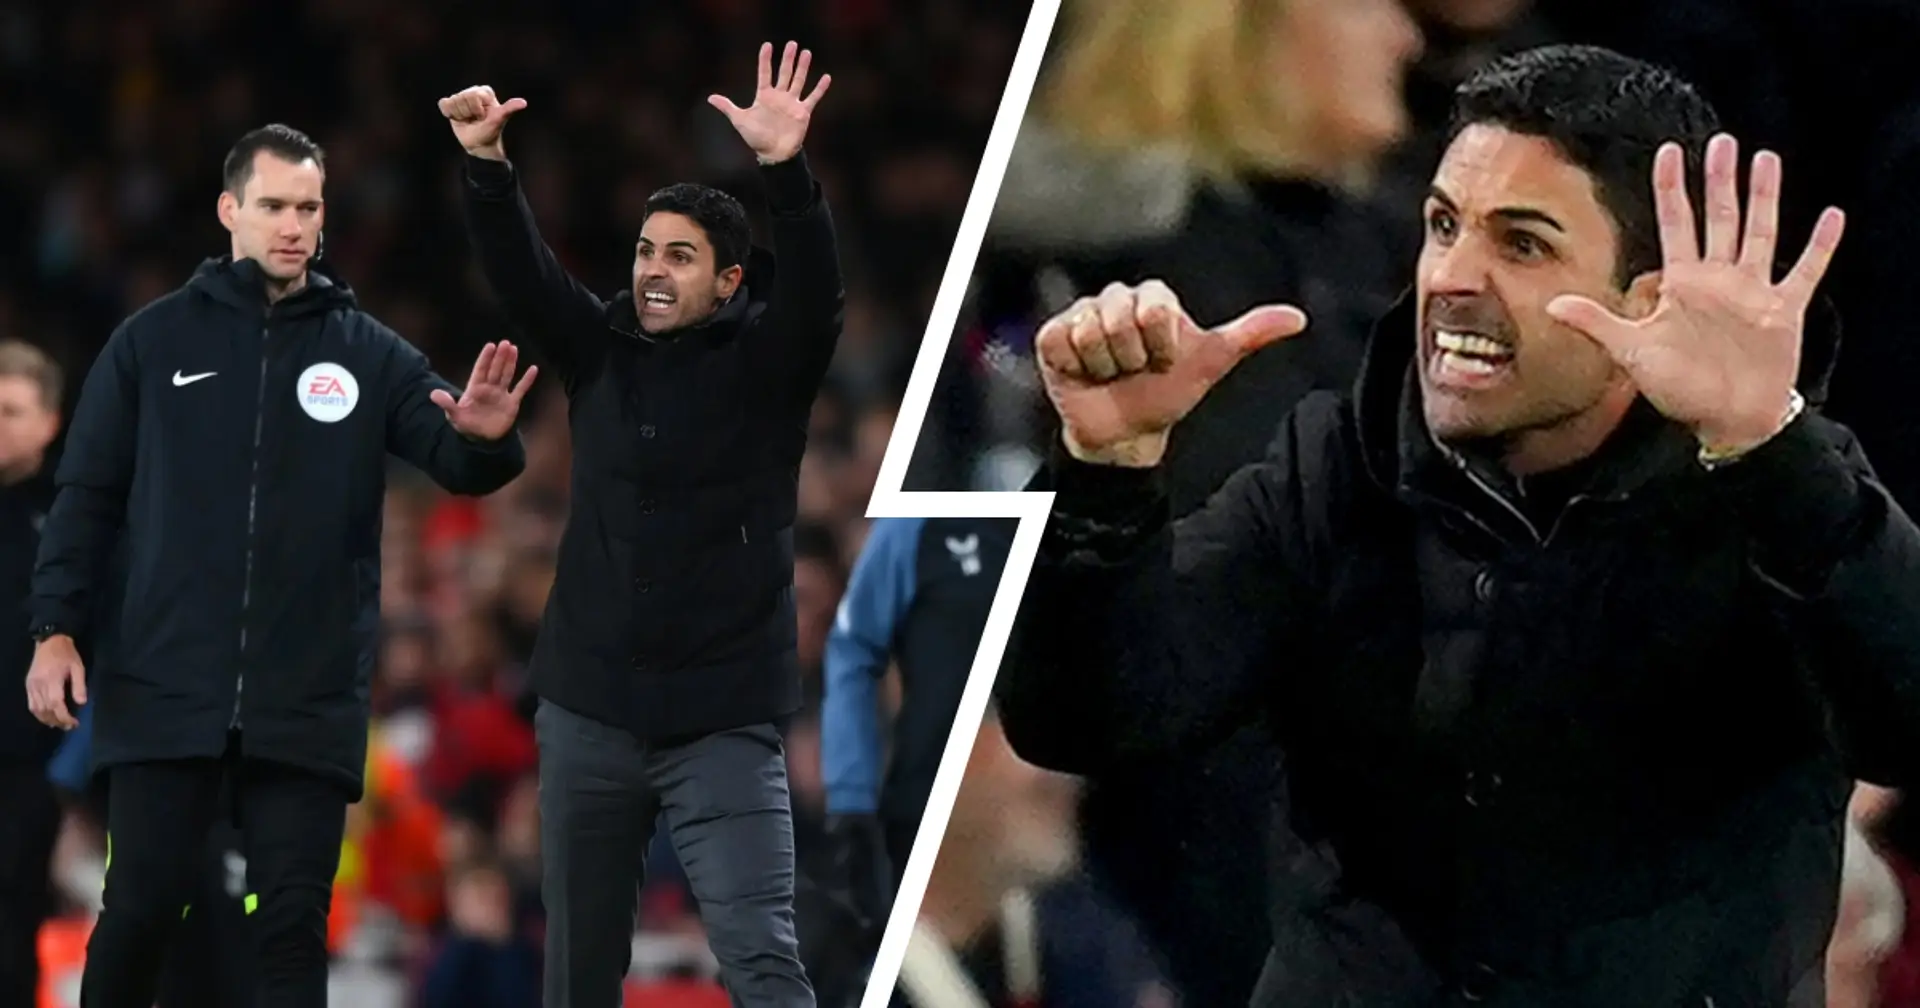 'He looked pathetic. That's not the Arsenal way': Arteta blasted for touchline behaviour